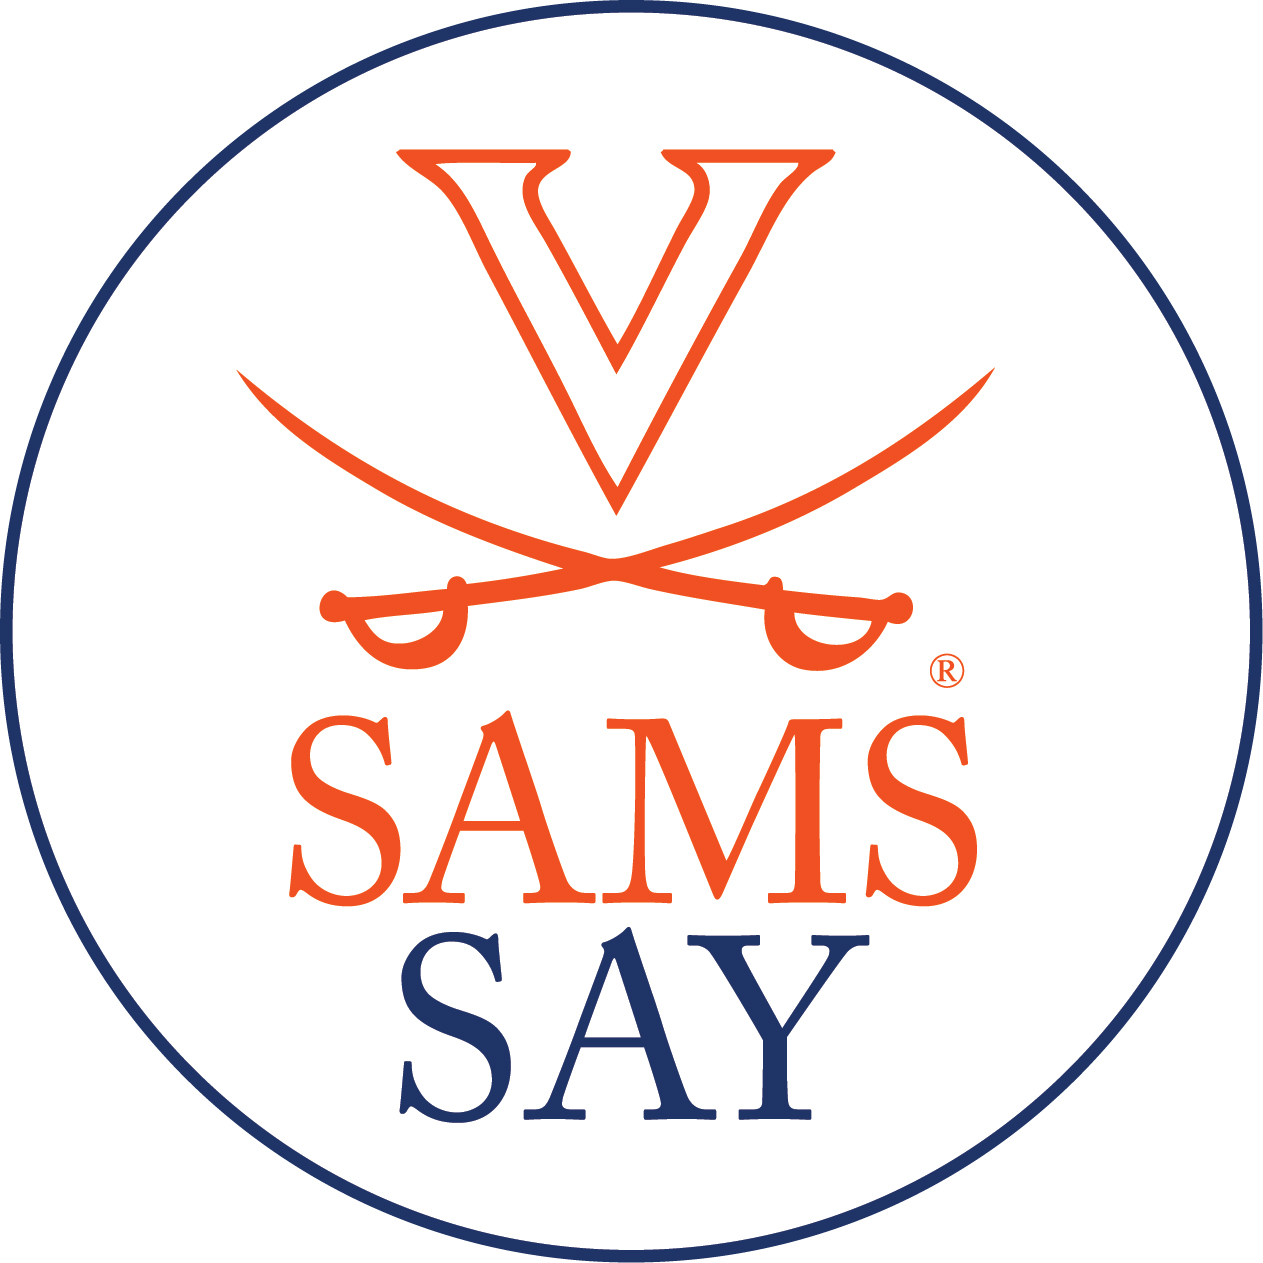 SAMS Say logo with a "V" and crossed sabres